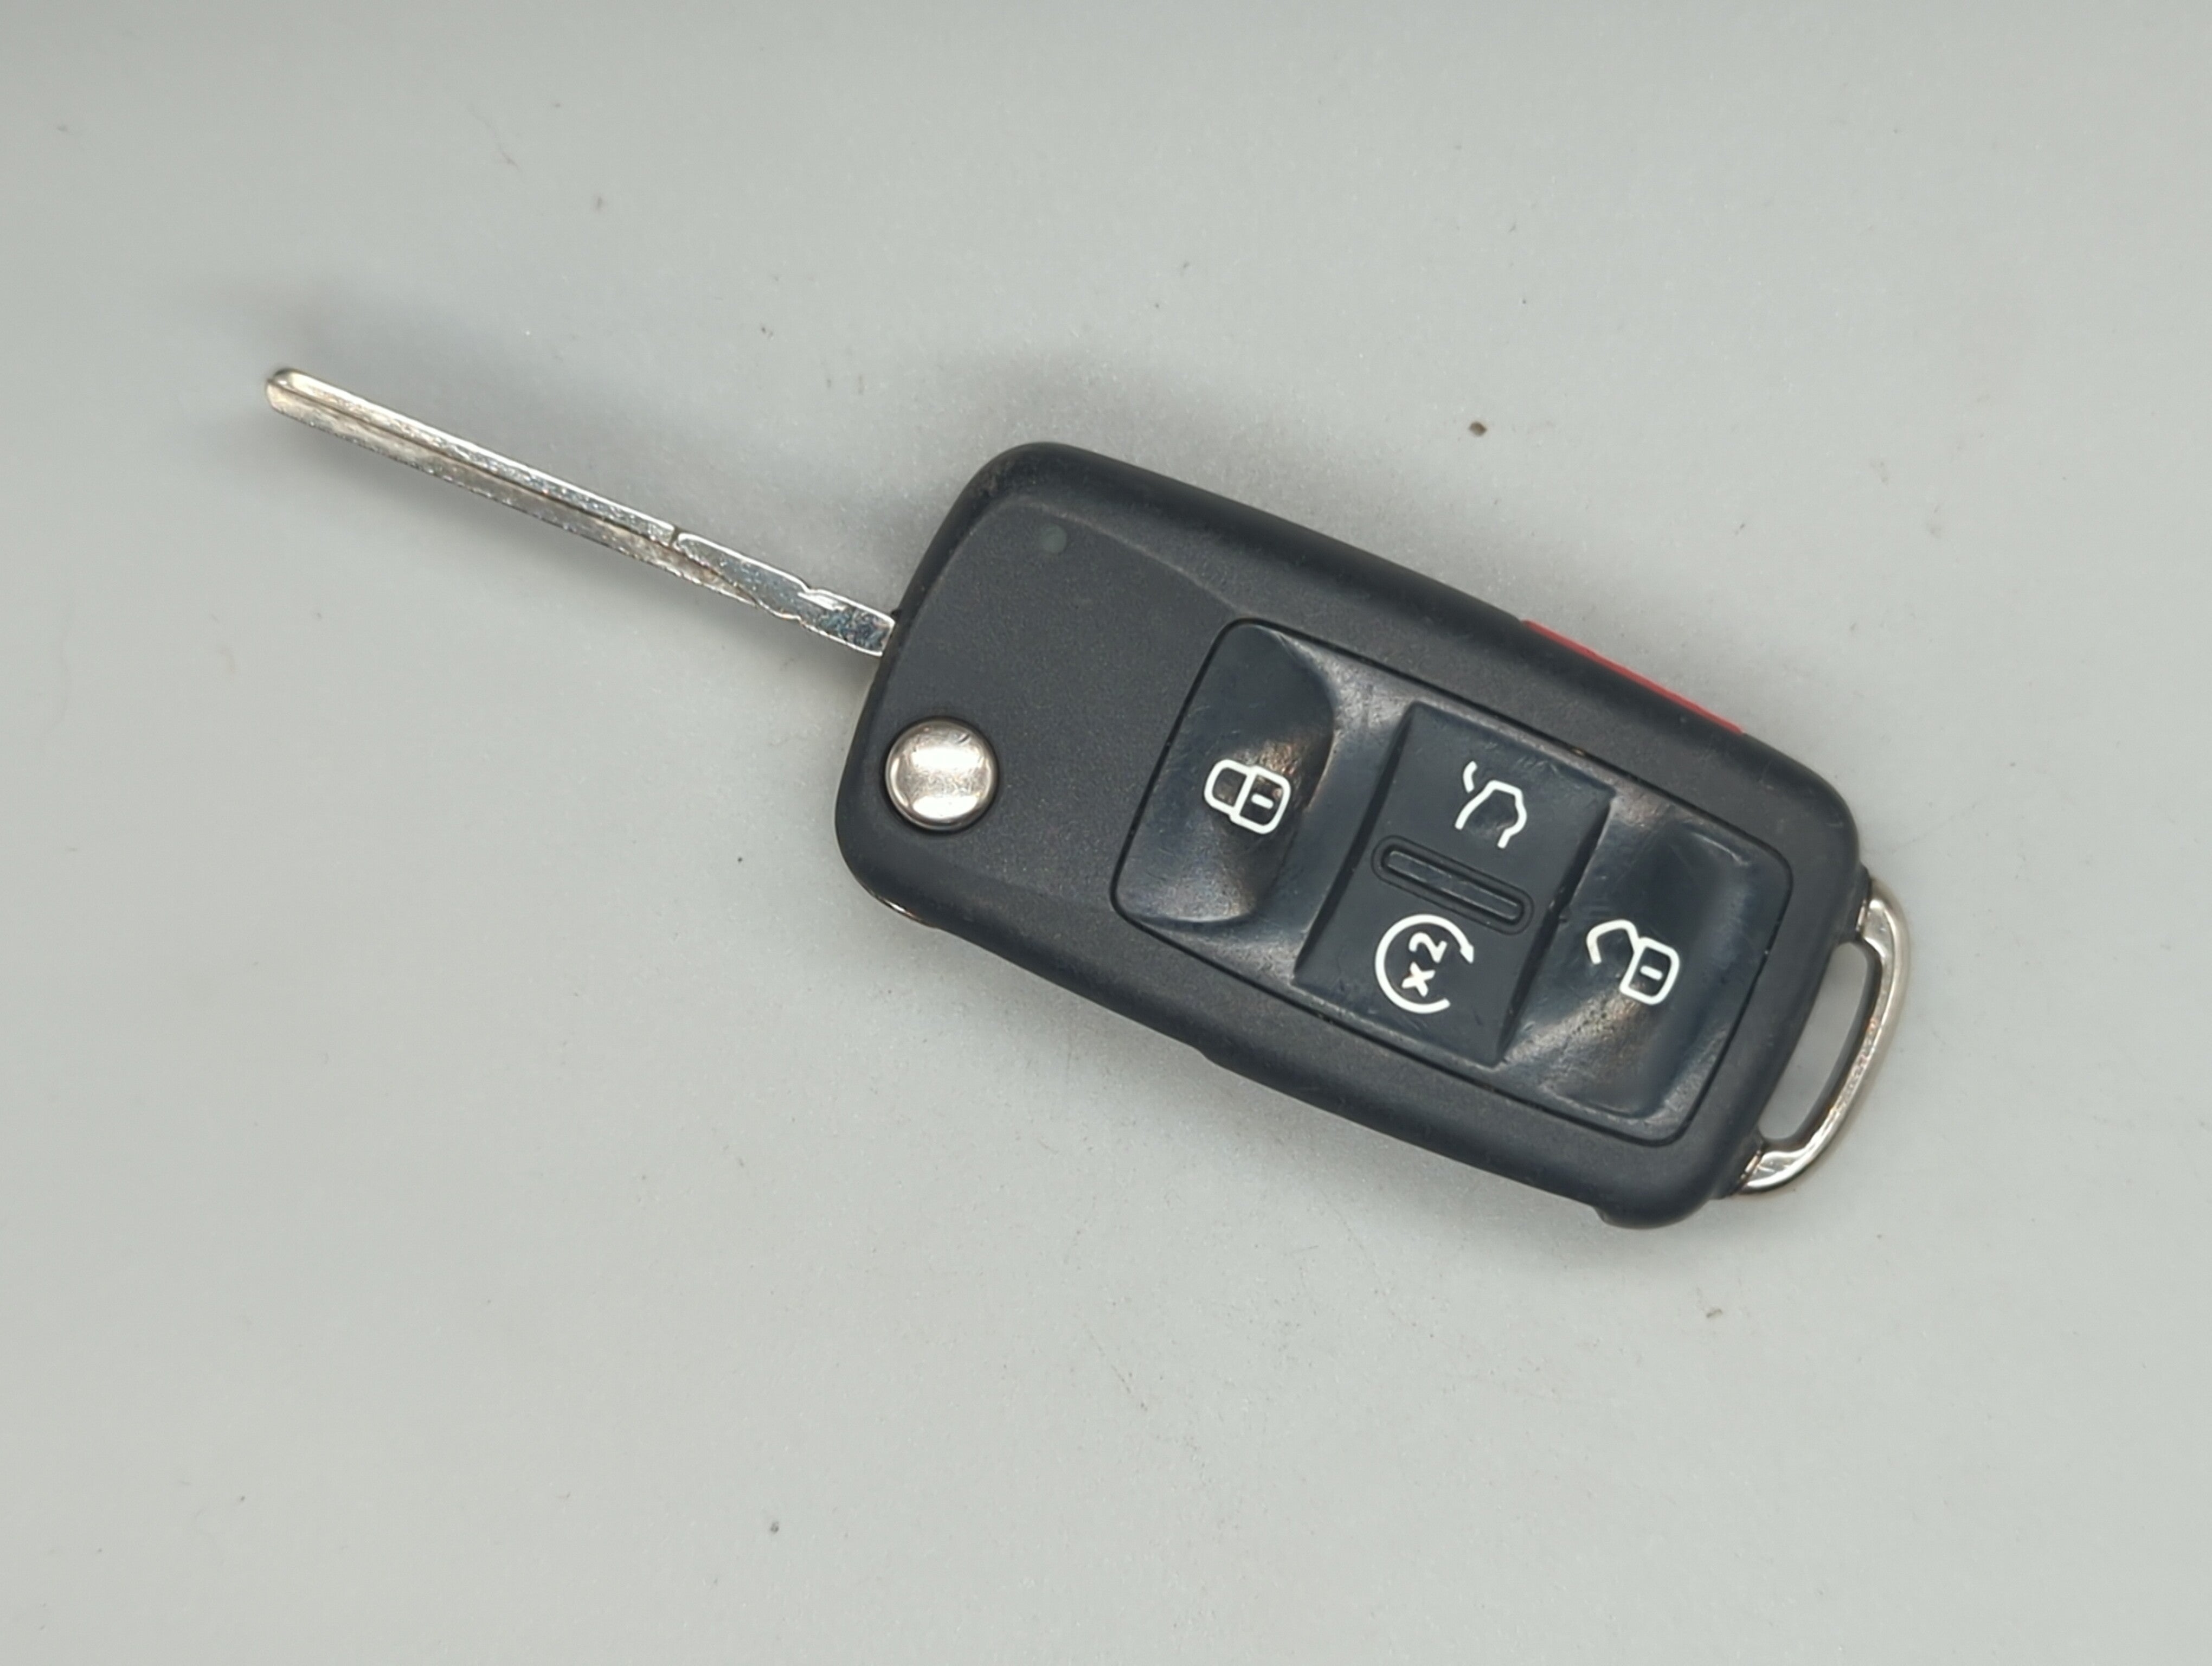 Volkswagen Cc Keyless Entry Remote Fob NBG010206T 5 buttons - Oemusedautoparts1.com